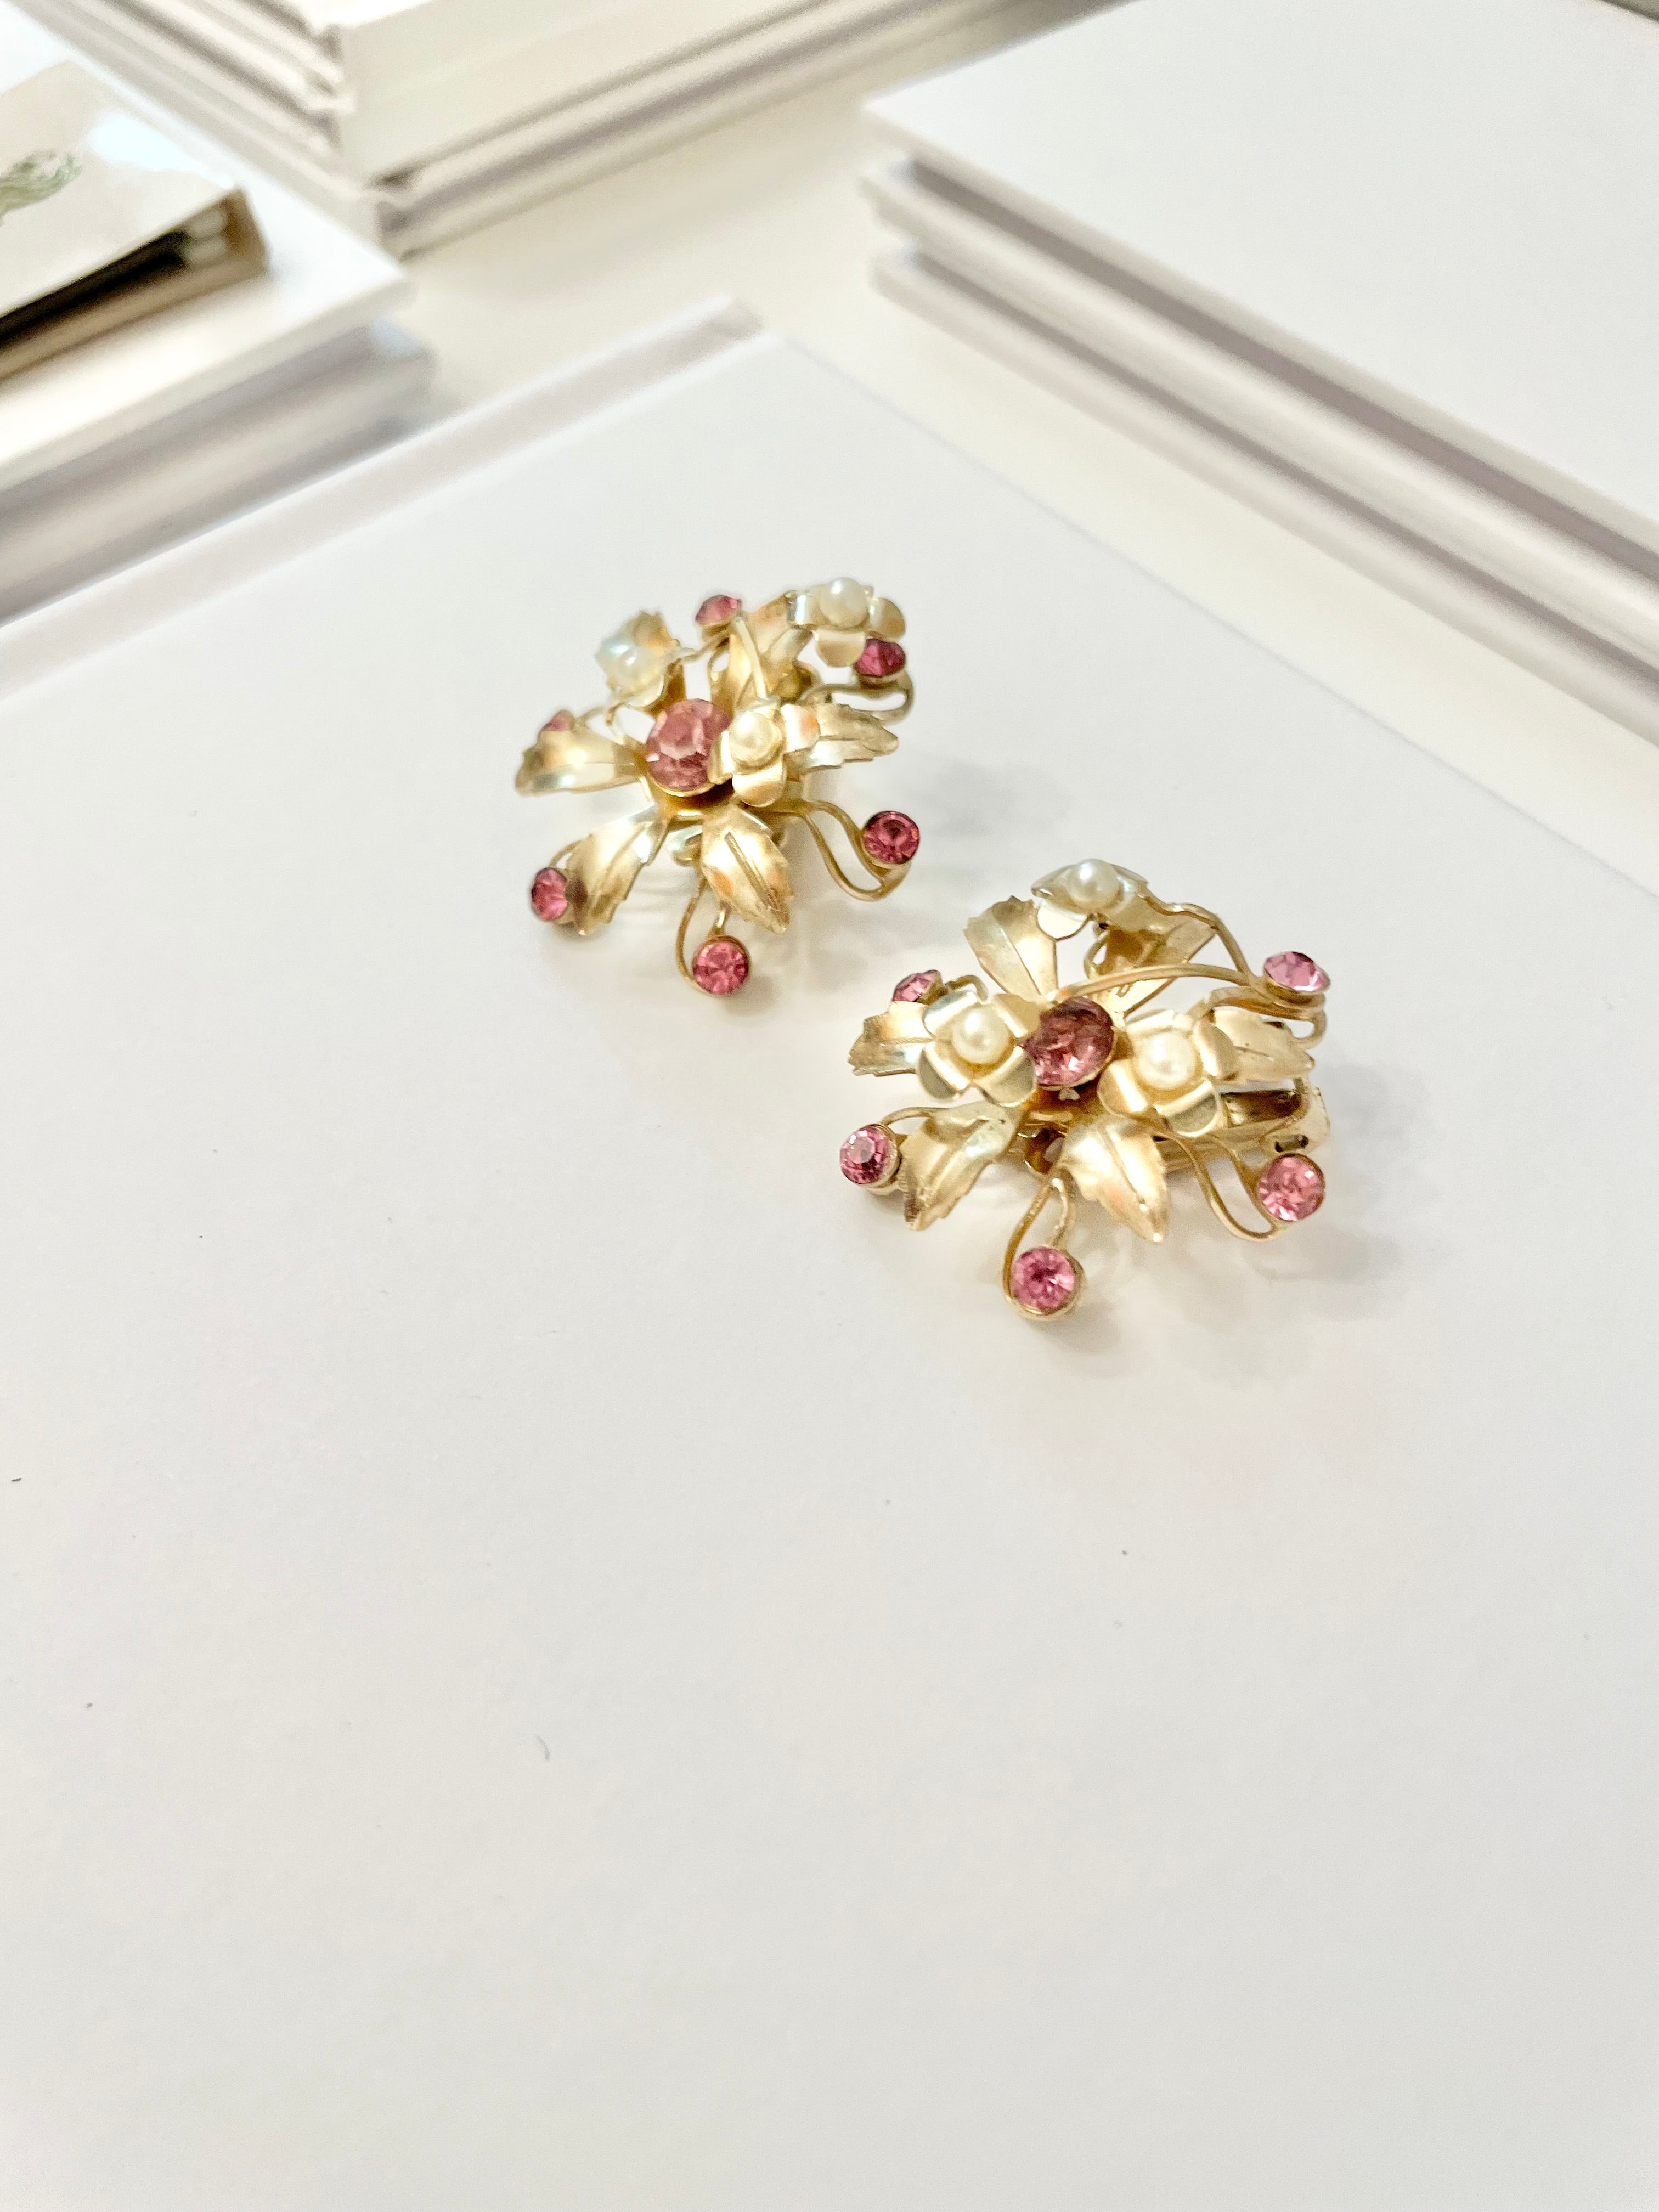 The Flirty Gal and her maddening love of everything pink! These pink and pearl sculpted flower earrings are pure perfection!